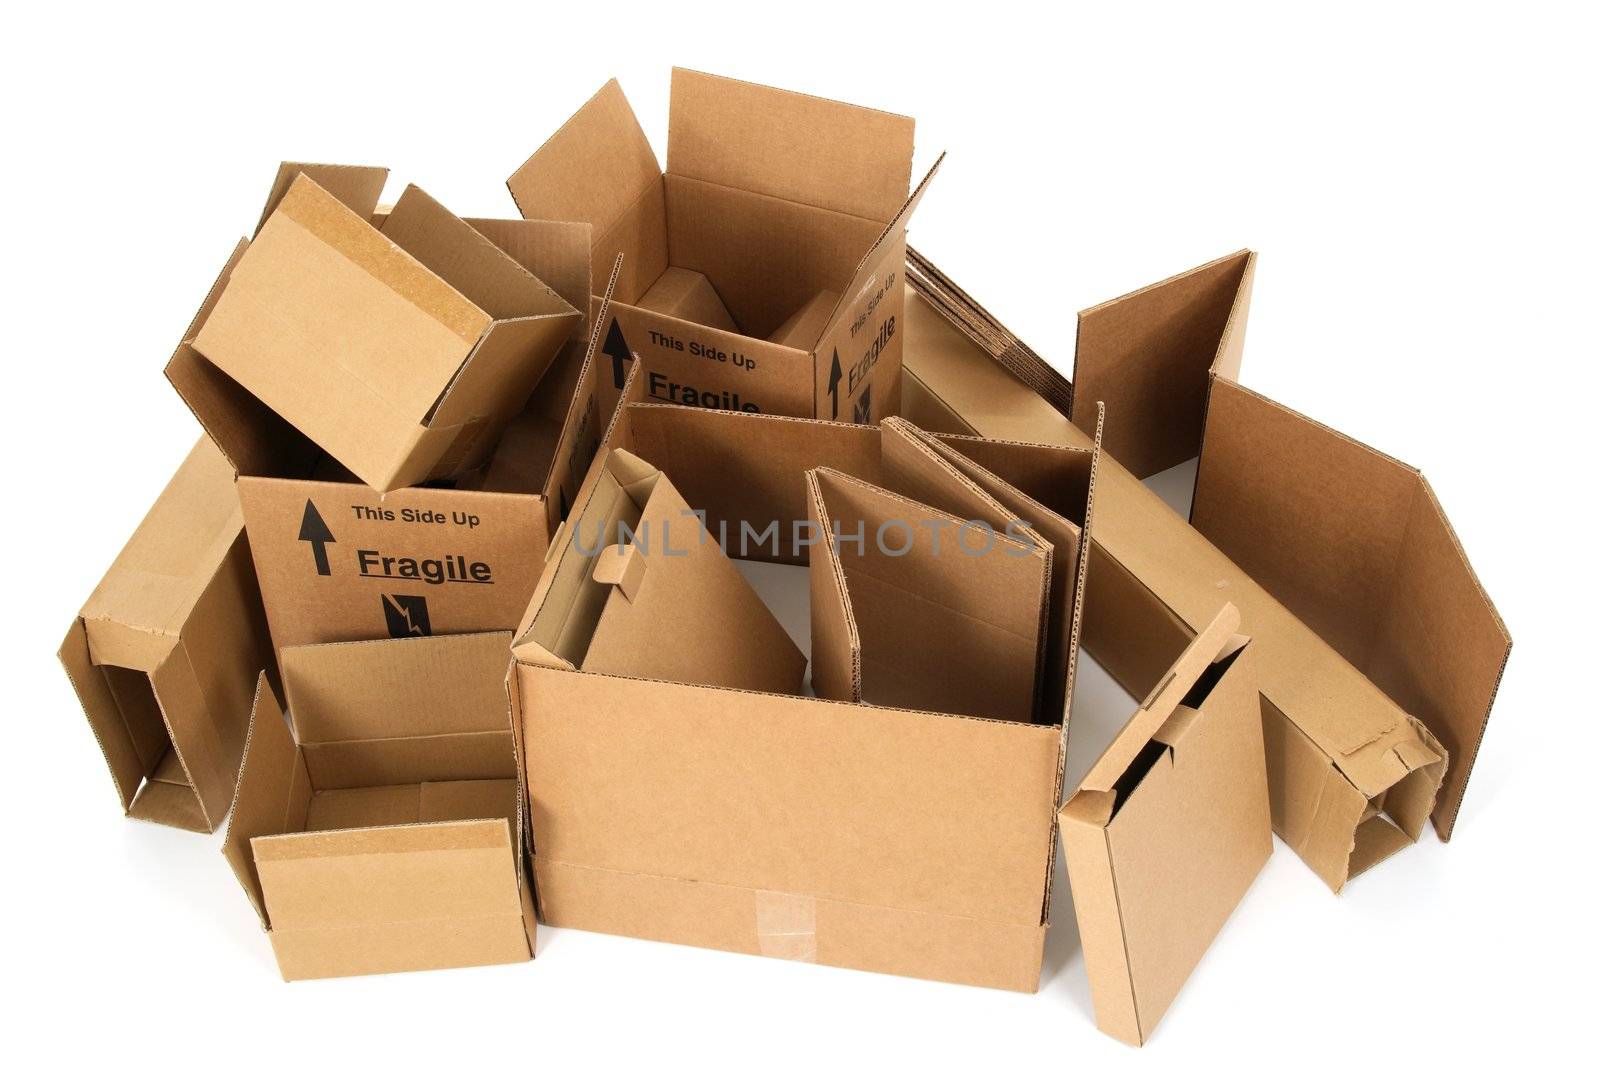 Pile of open cardboard boxes on white background.